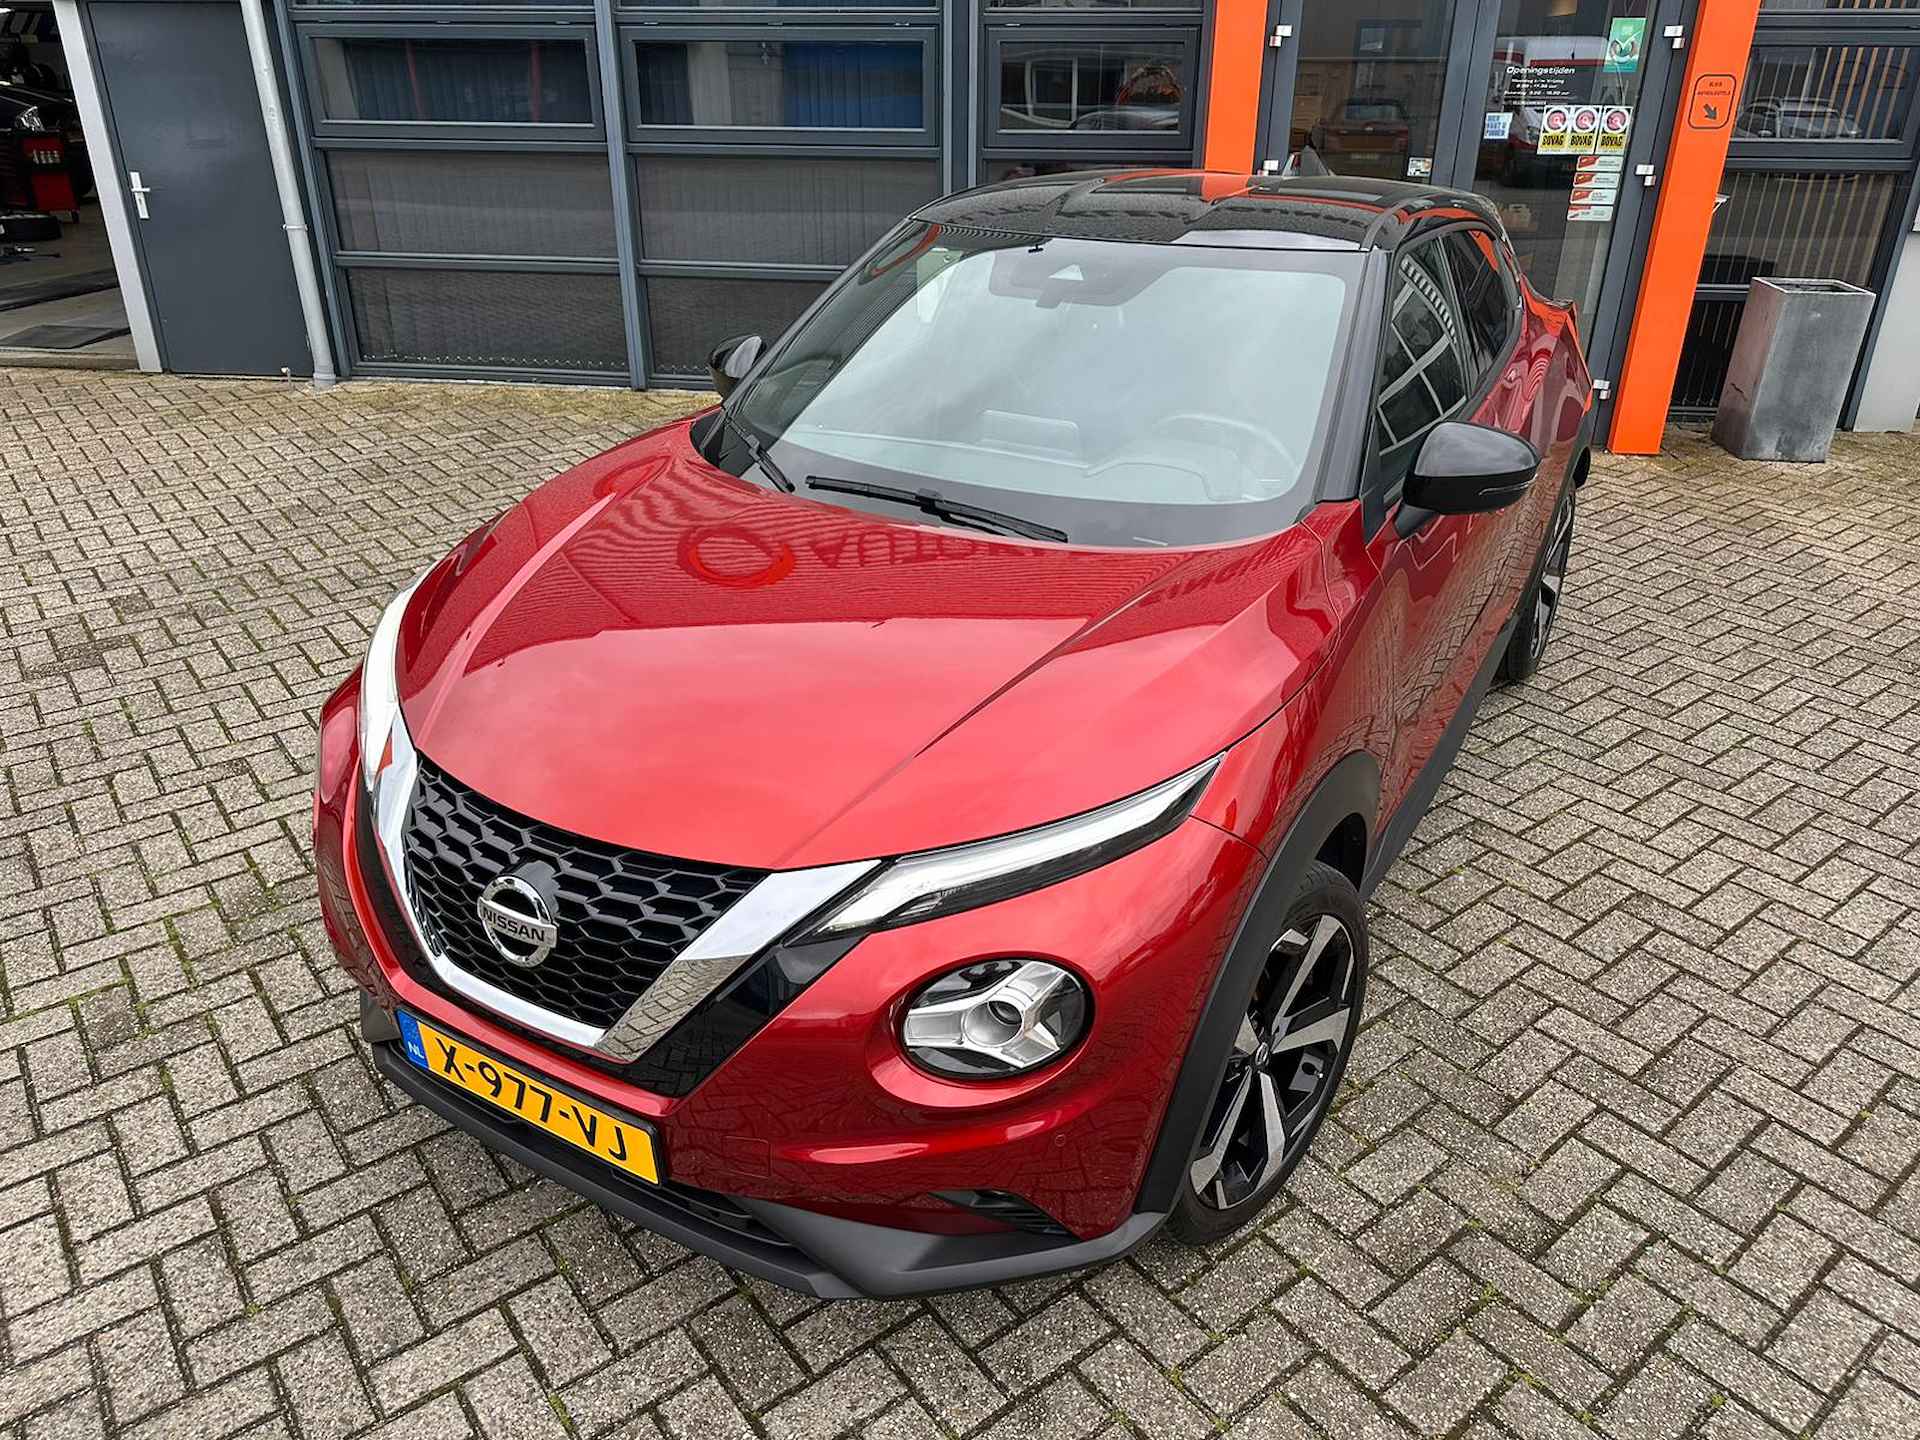 Nissan Juke 1.0 DIG-T Premiere Edition Automaat Apple/Android Carply / Navi / Camera / 19 inch / Cruise Control / Keyless / Start/stop - 10/25